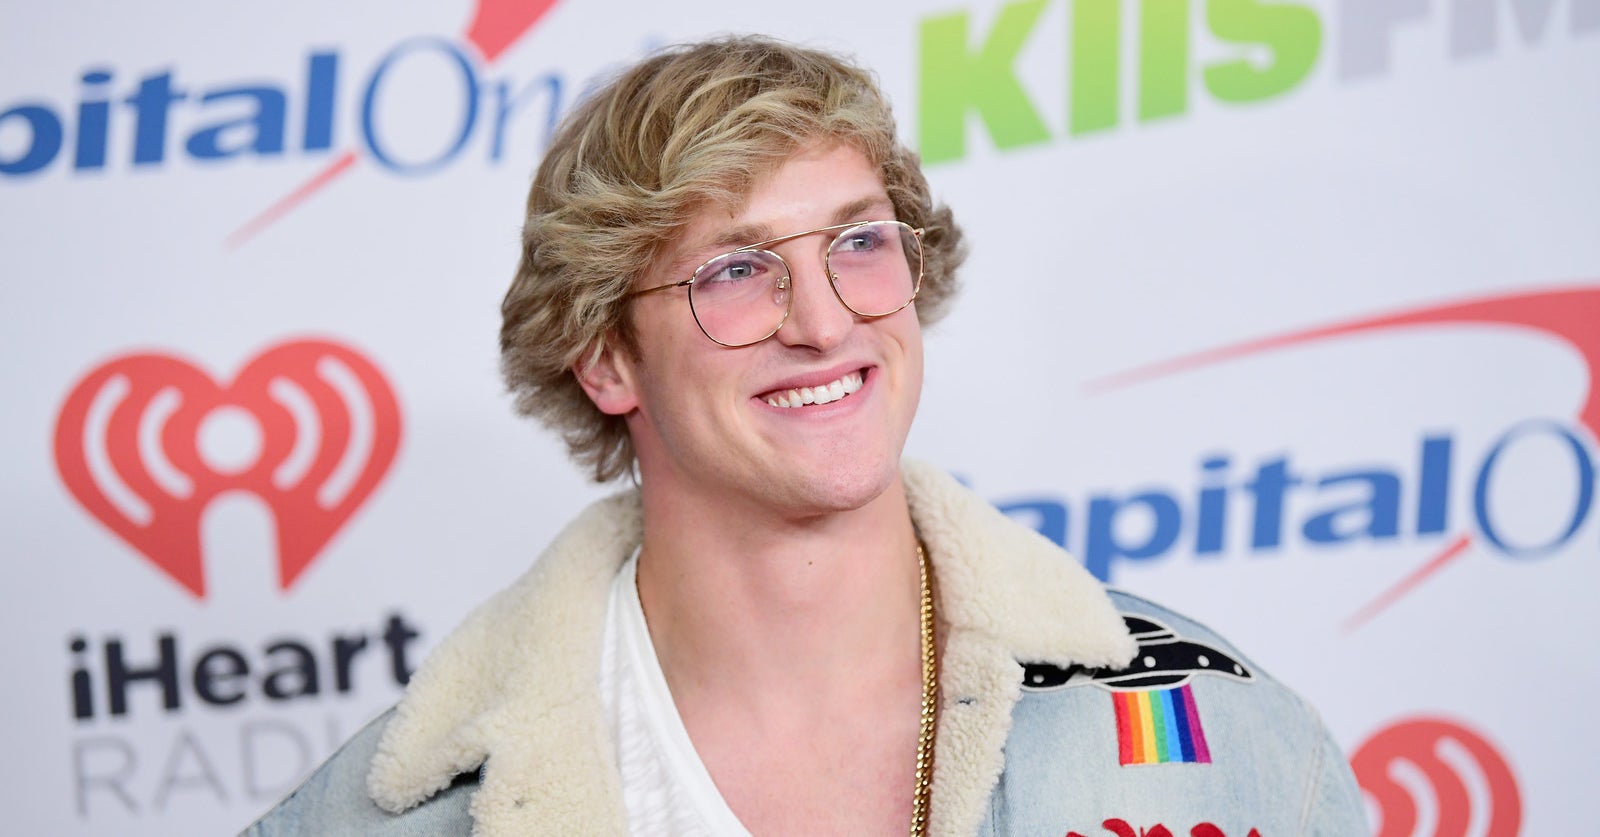 Sophie Turner Fucked Hard - Even When He Loses, Logan Paul Wins